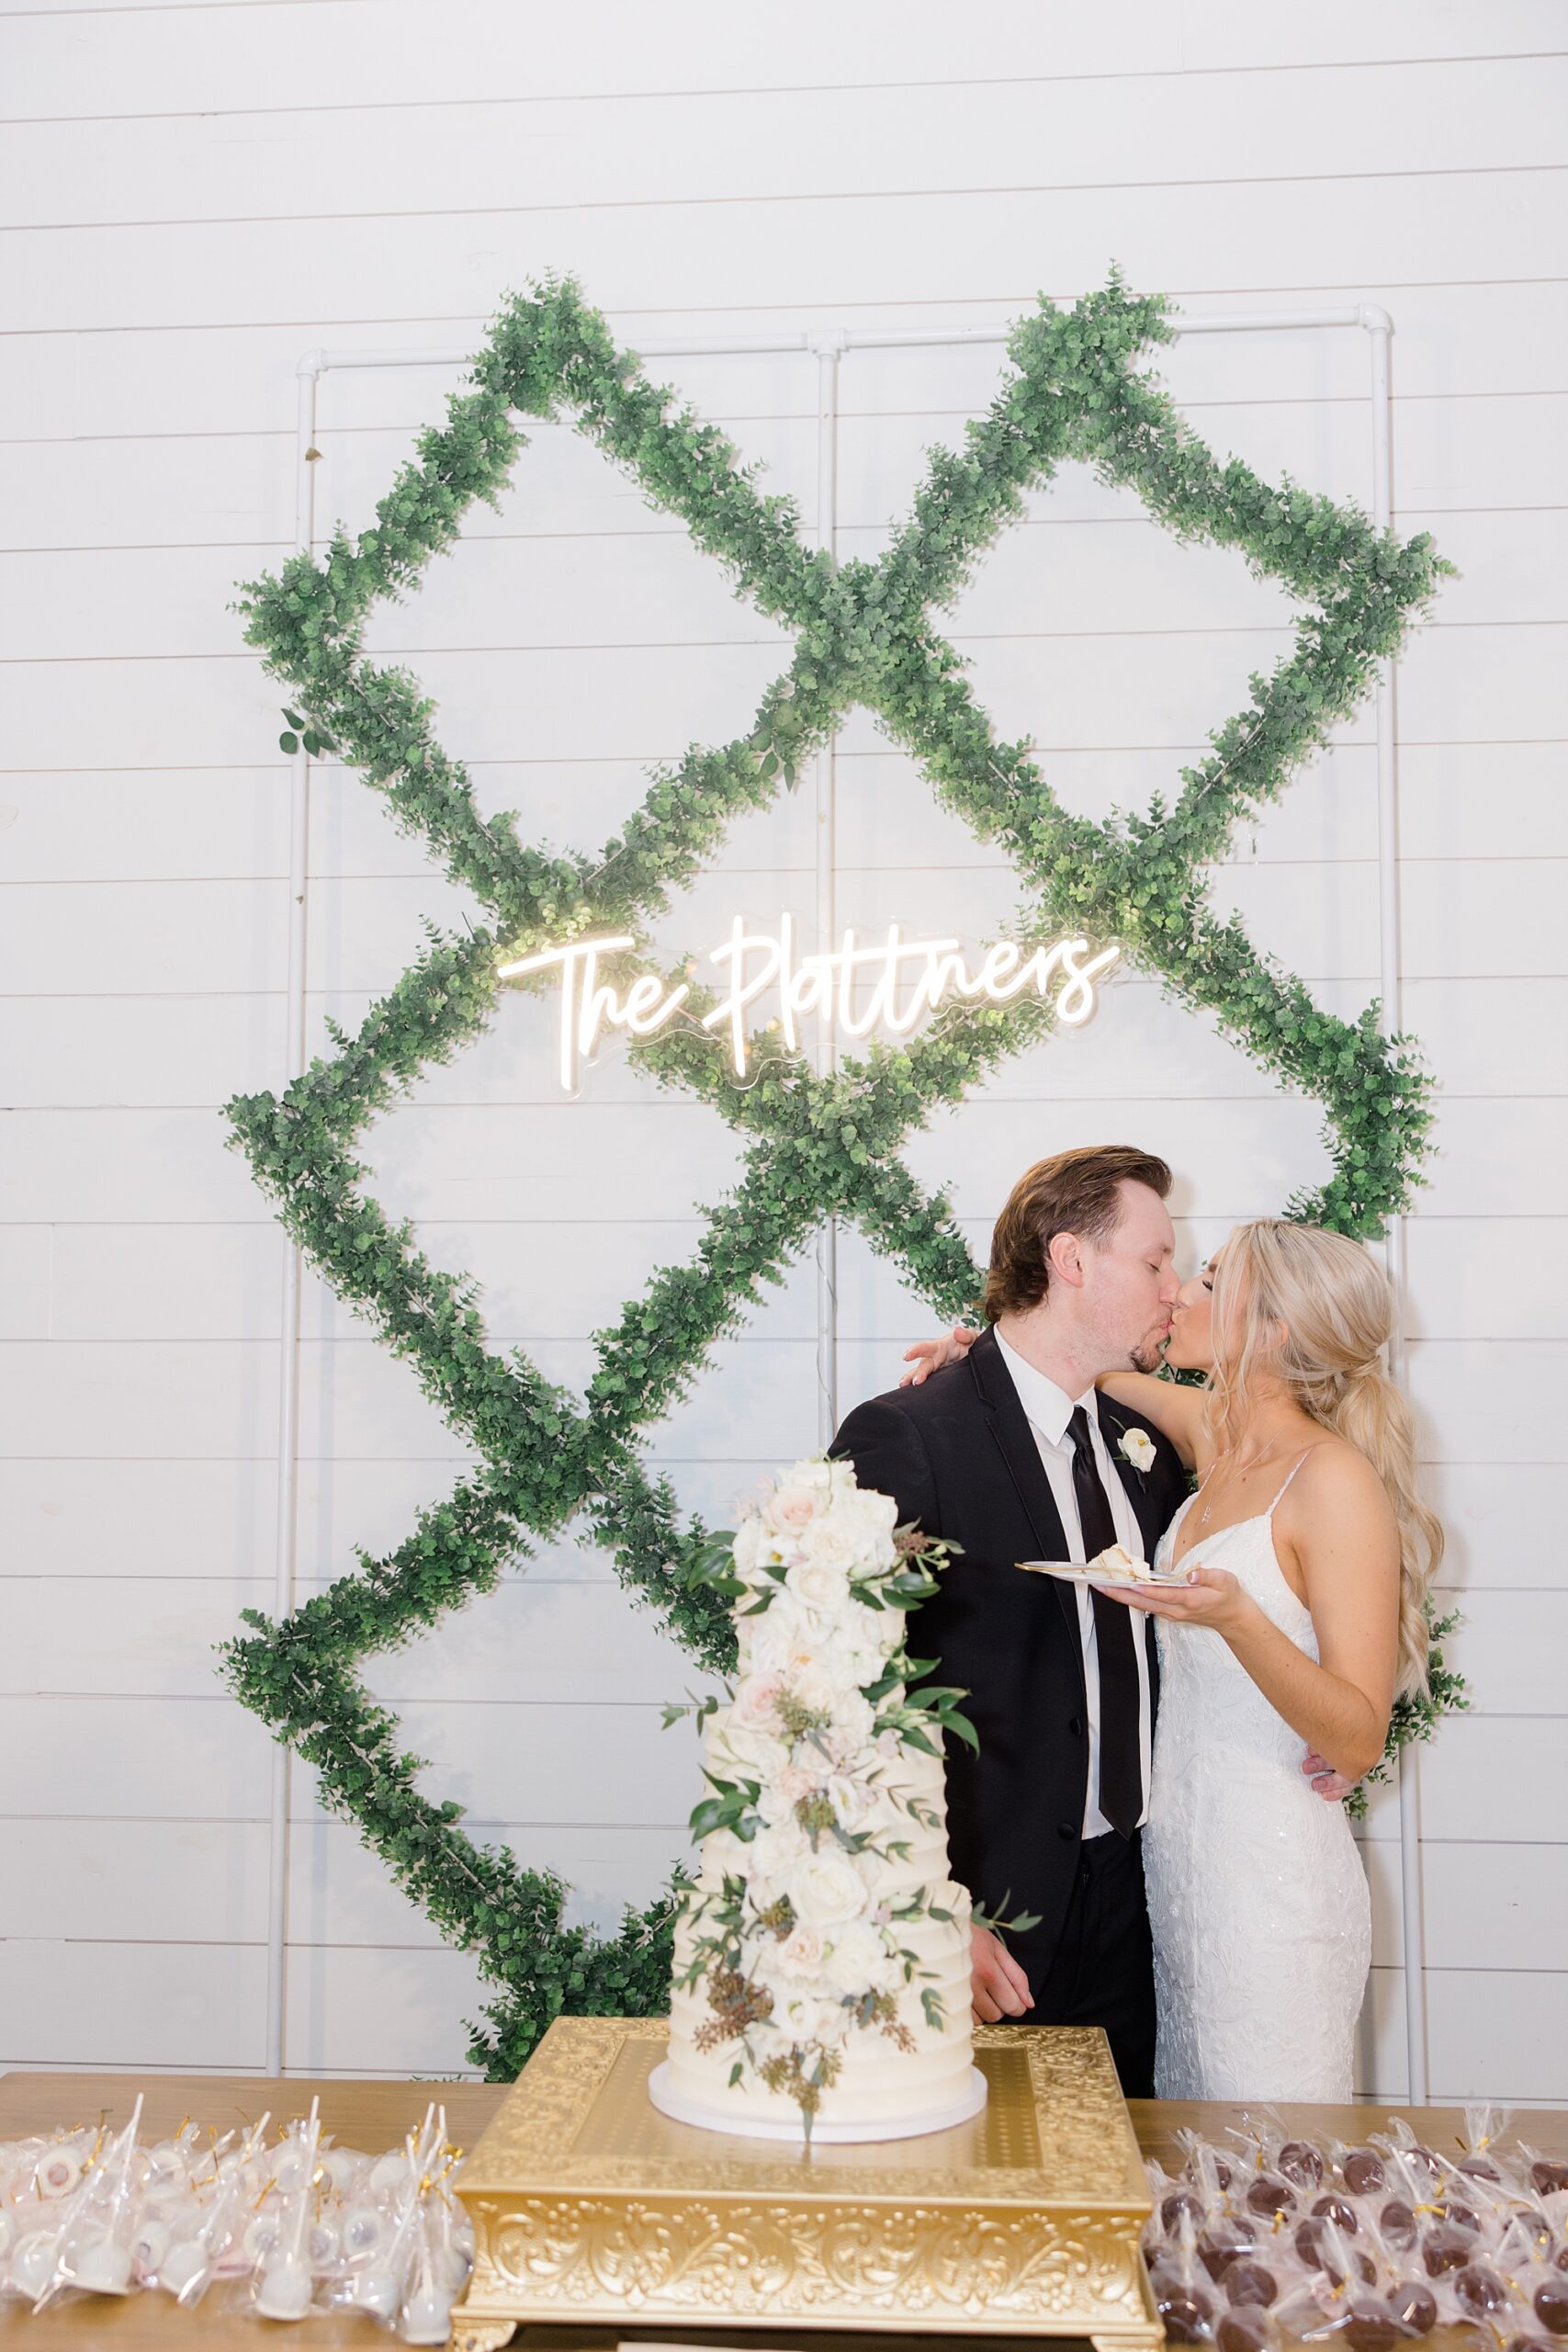 bride and groom cut wedding cake by wall with greenery accents